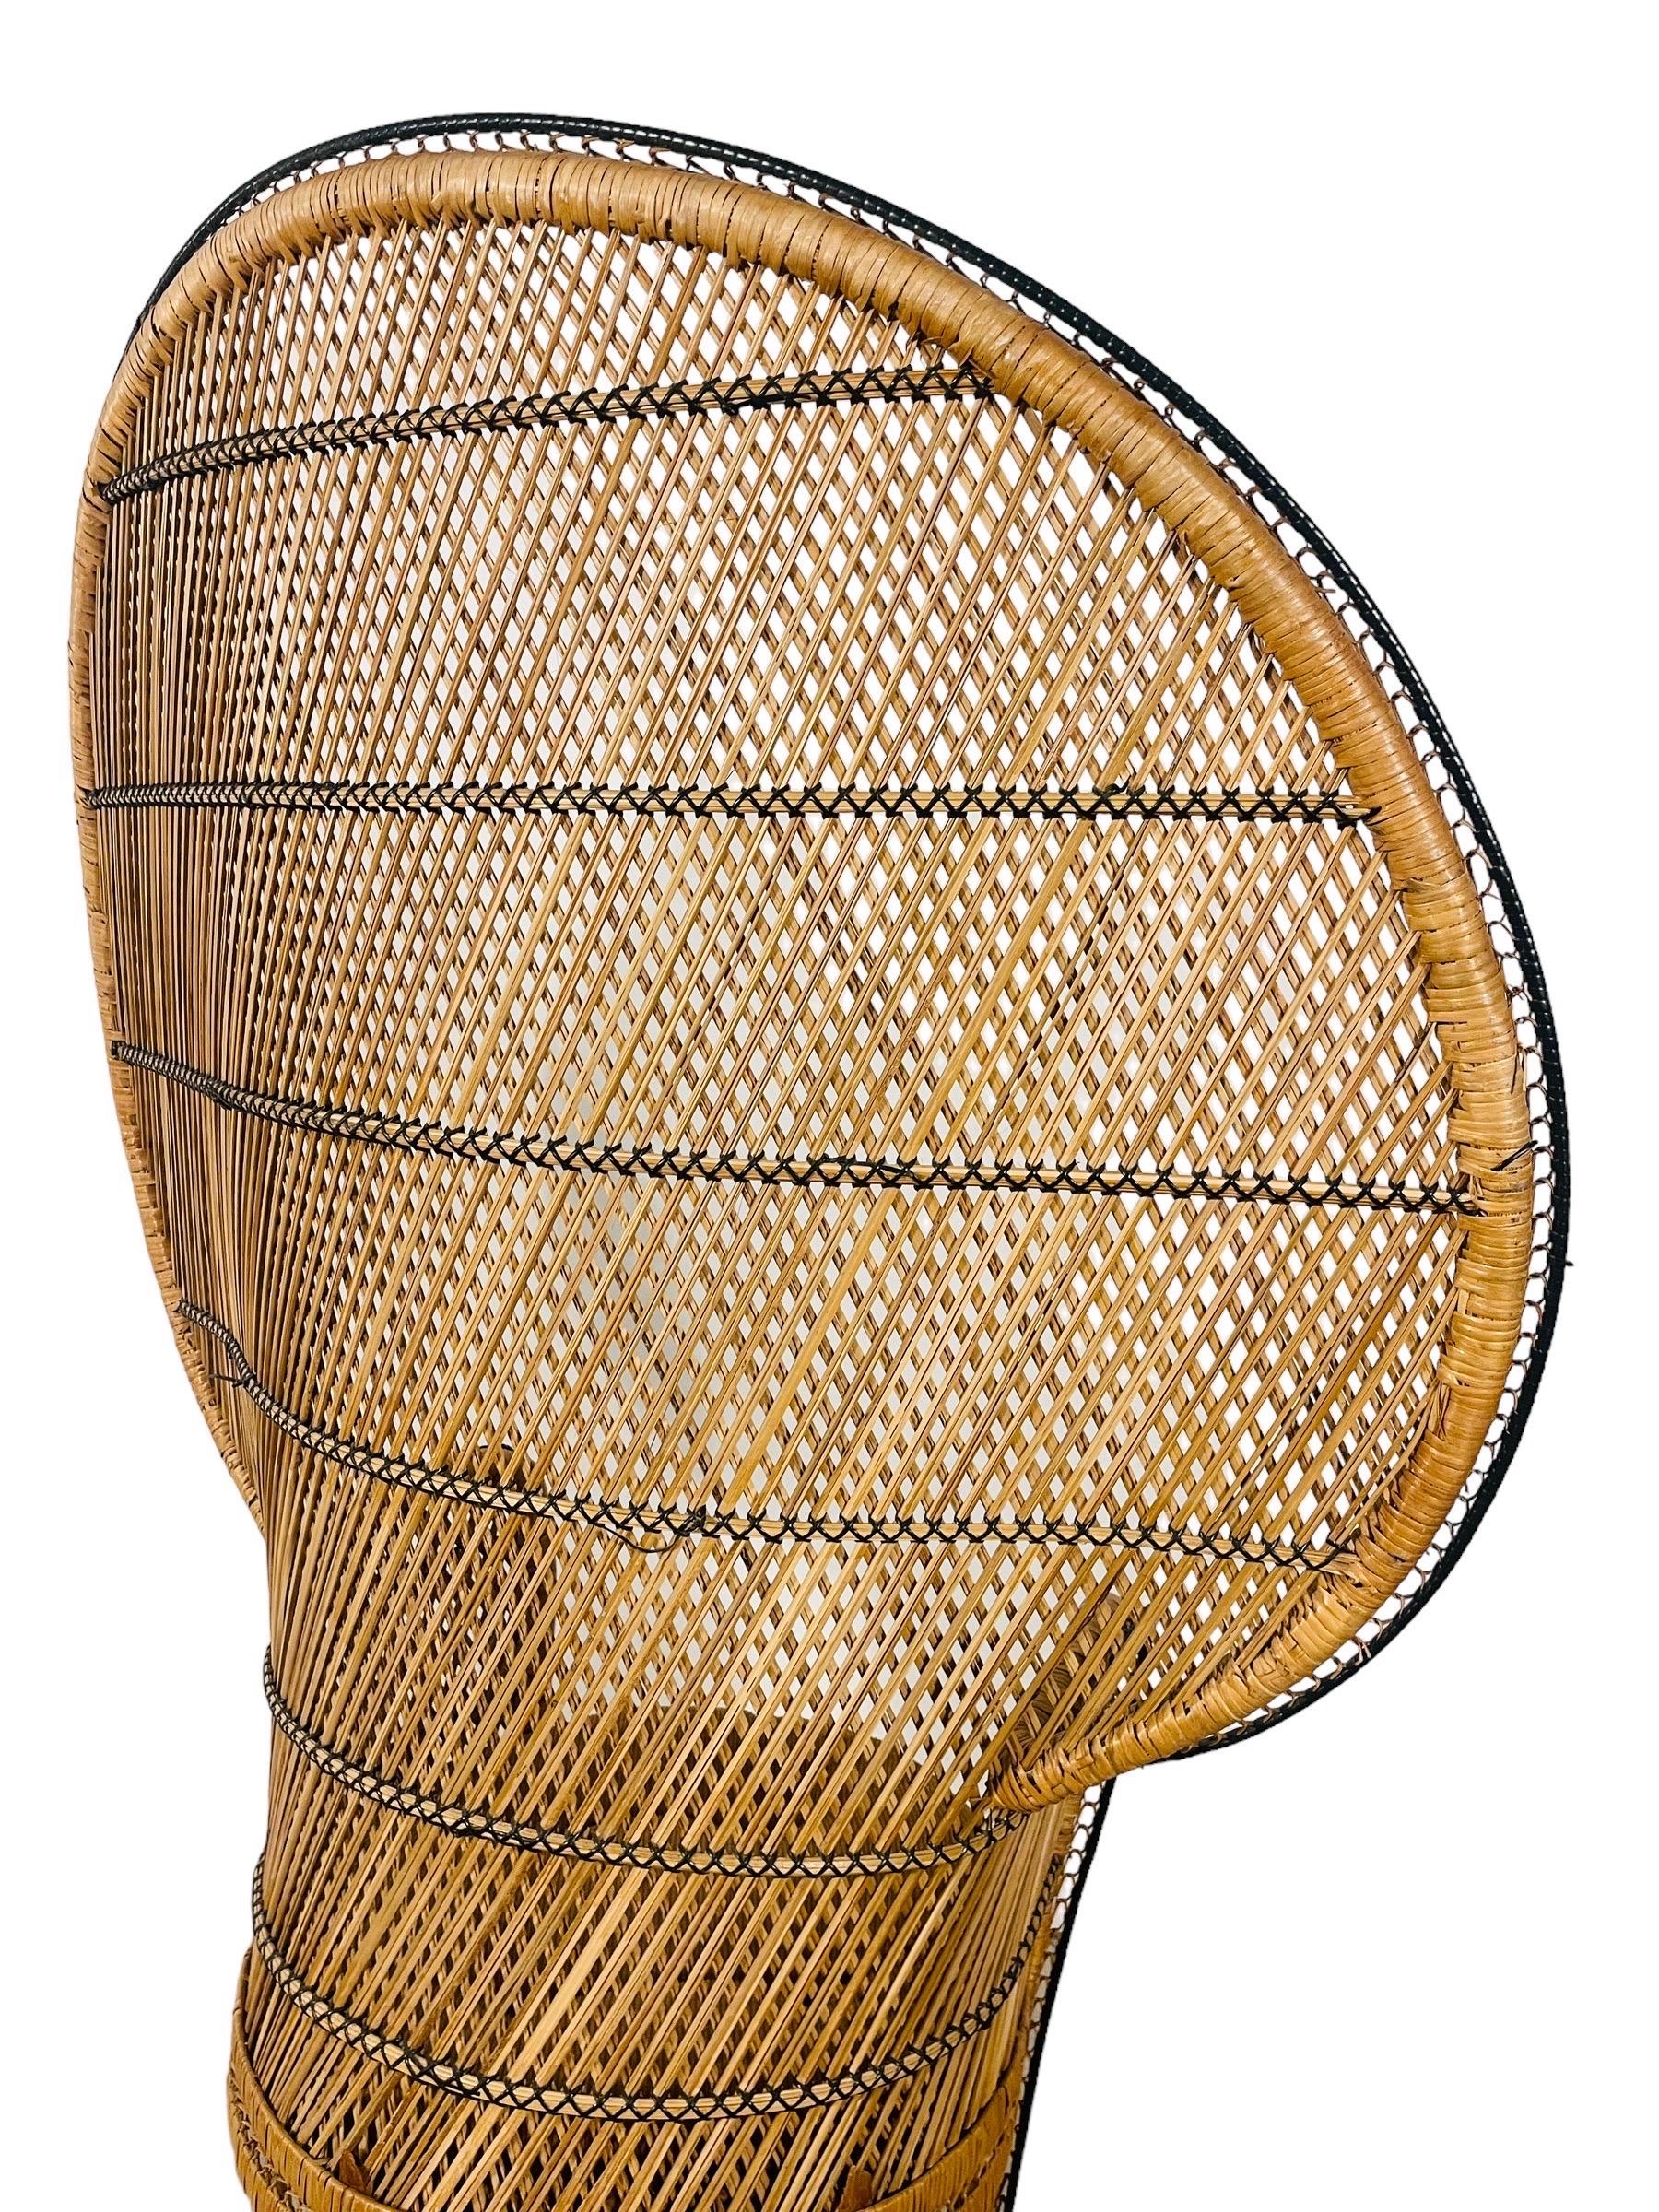 20th Century Vintage Boho Chic Wicker, Rattan Peacock Chair For Sale